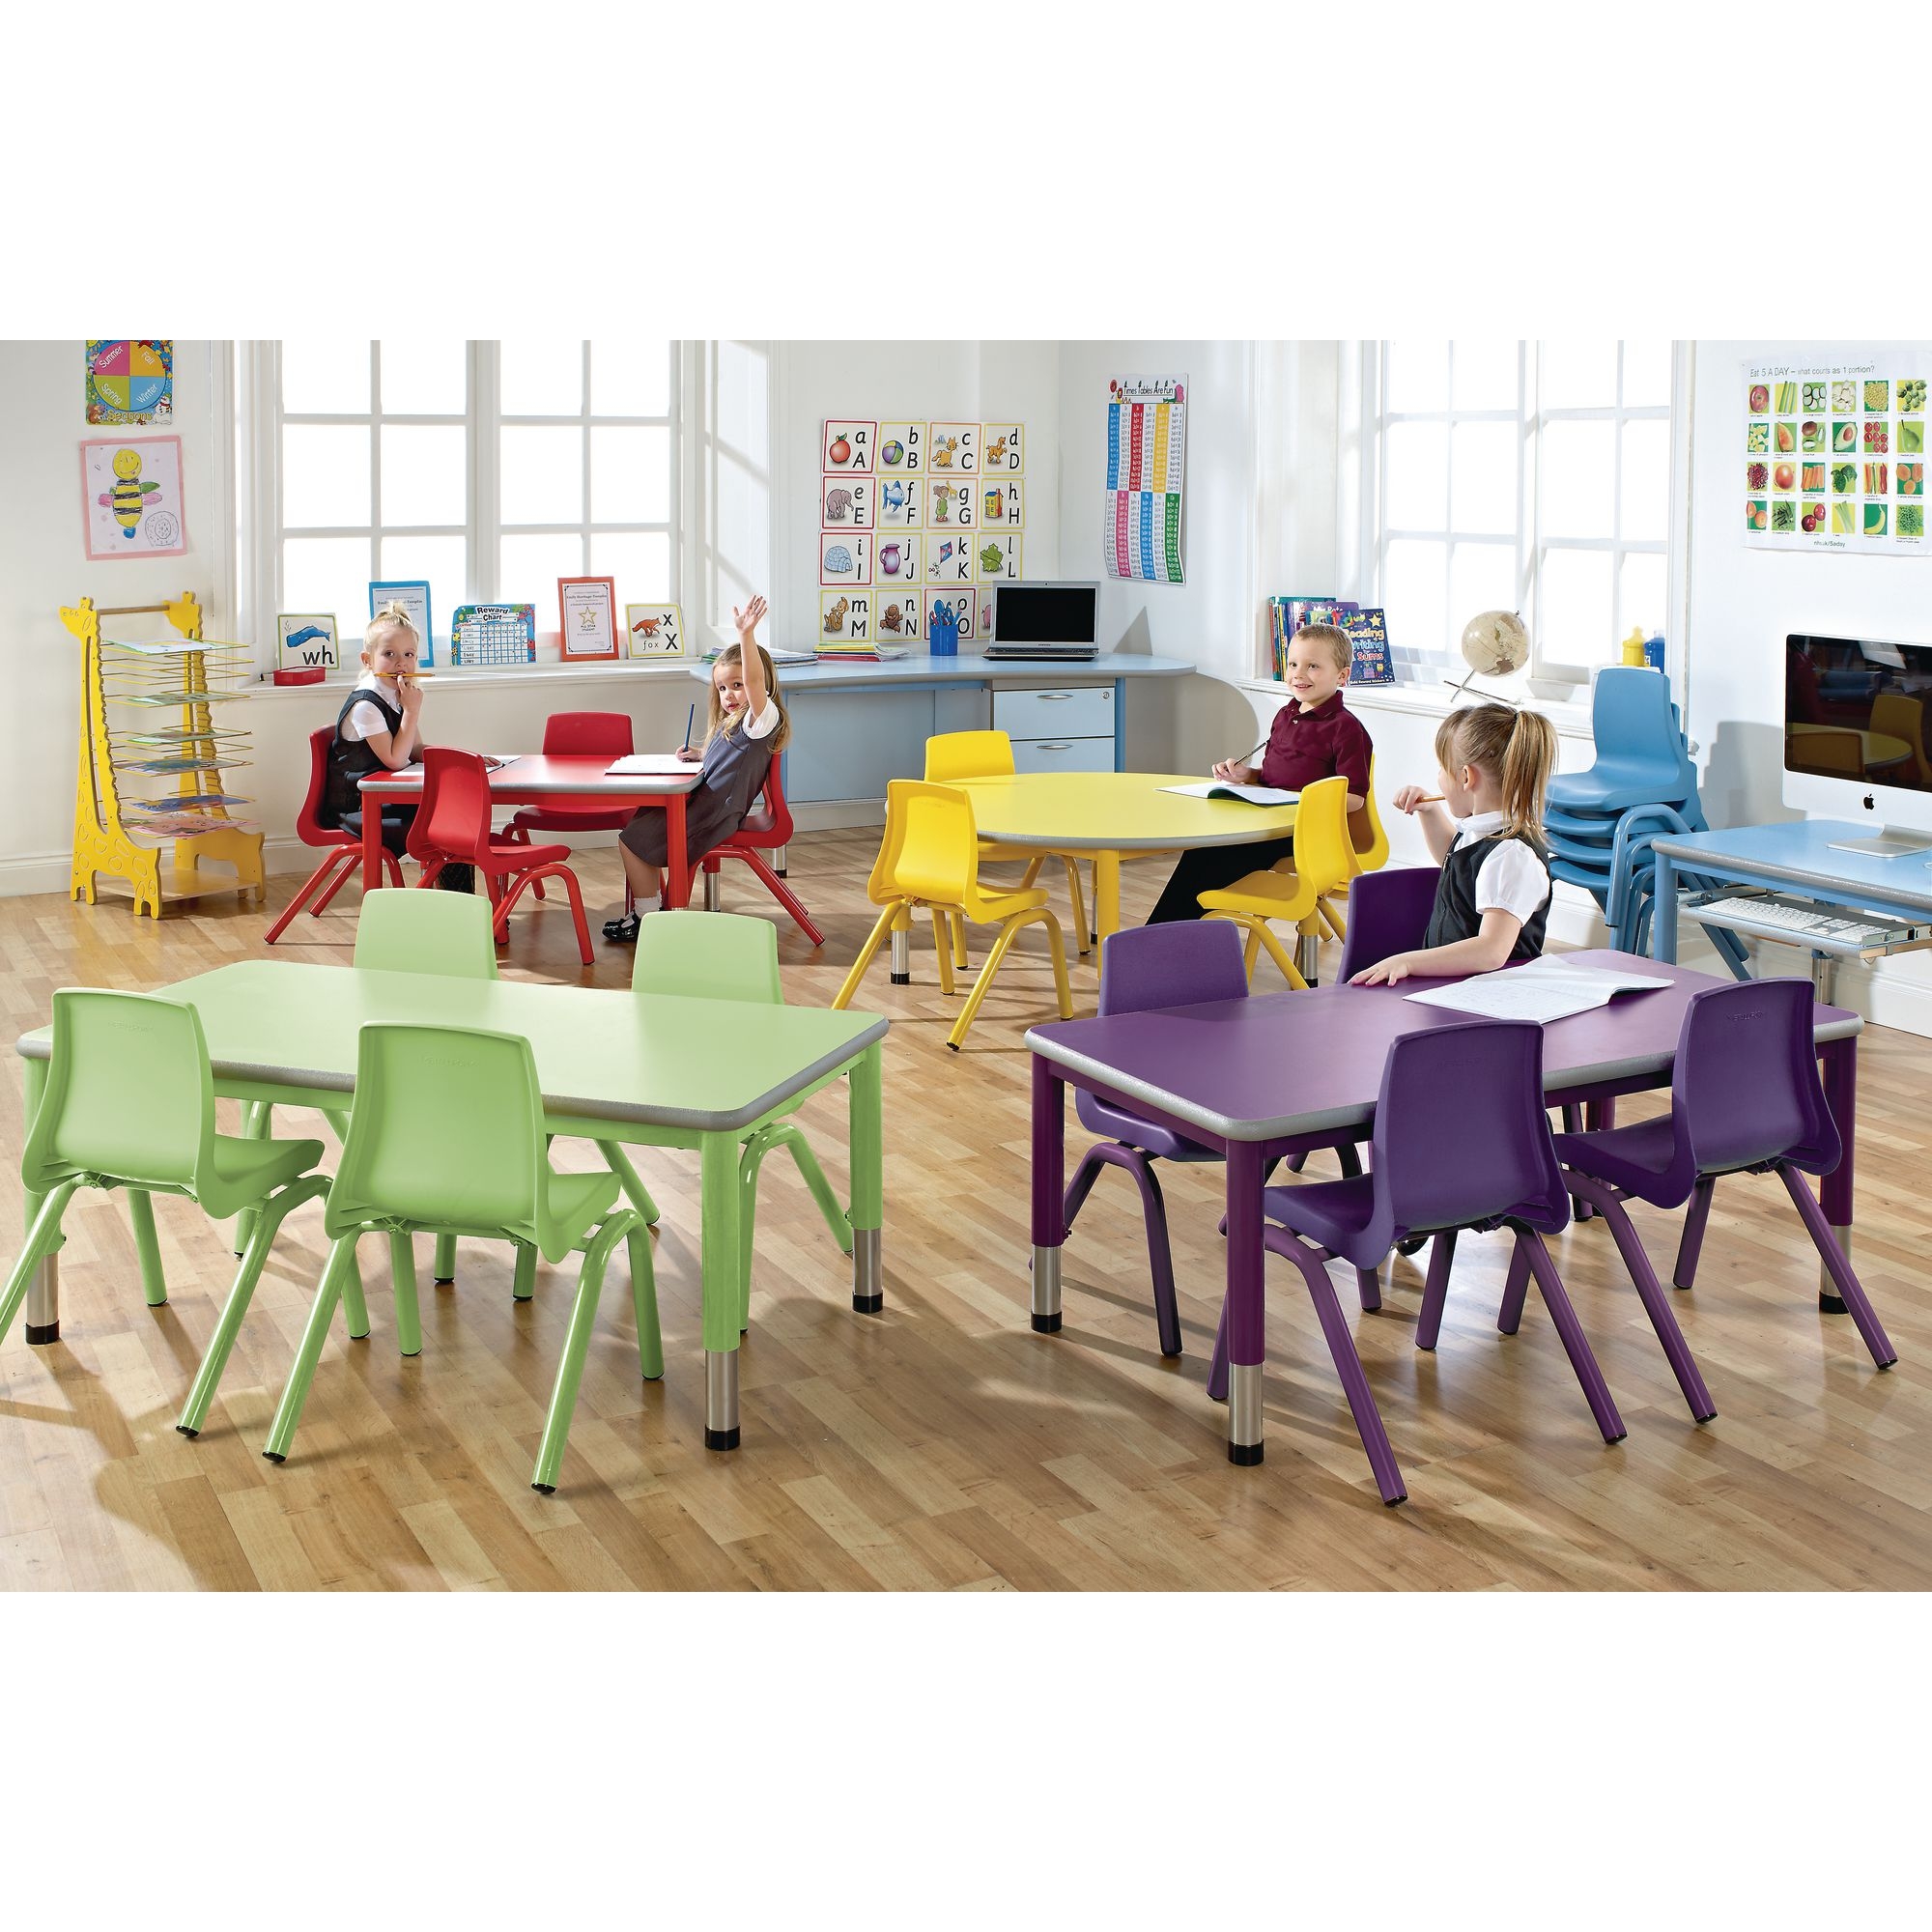 Harlequin Rectangular Height Adjustable Steel Classroom Pack: Table and 4 Chairs - 900 x 600 x 590mm - Purple